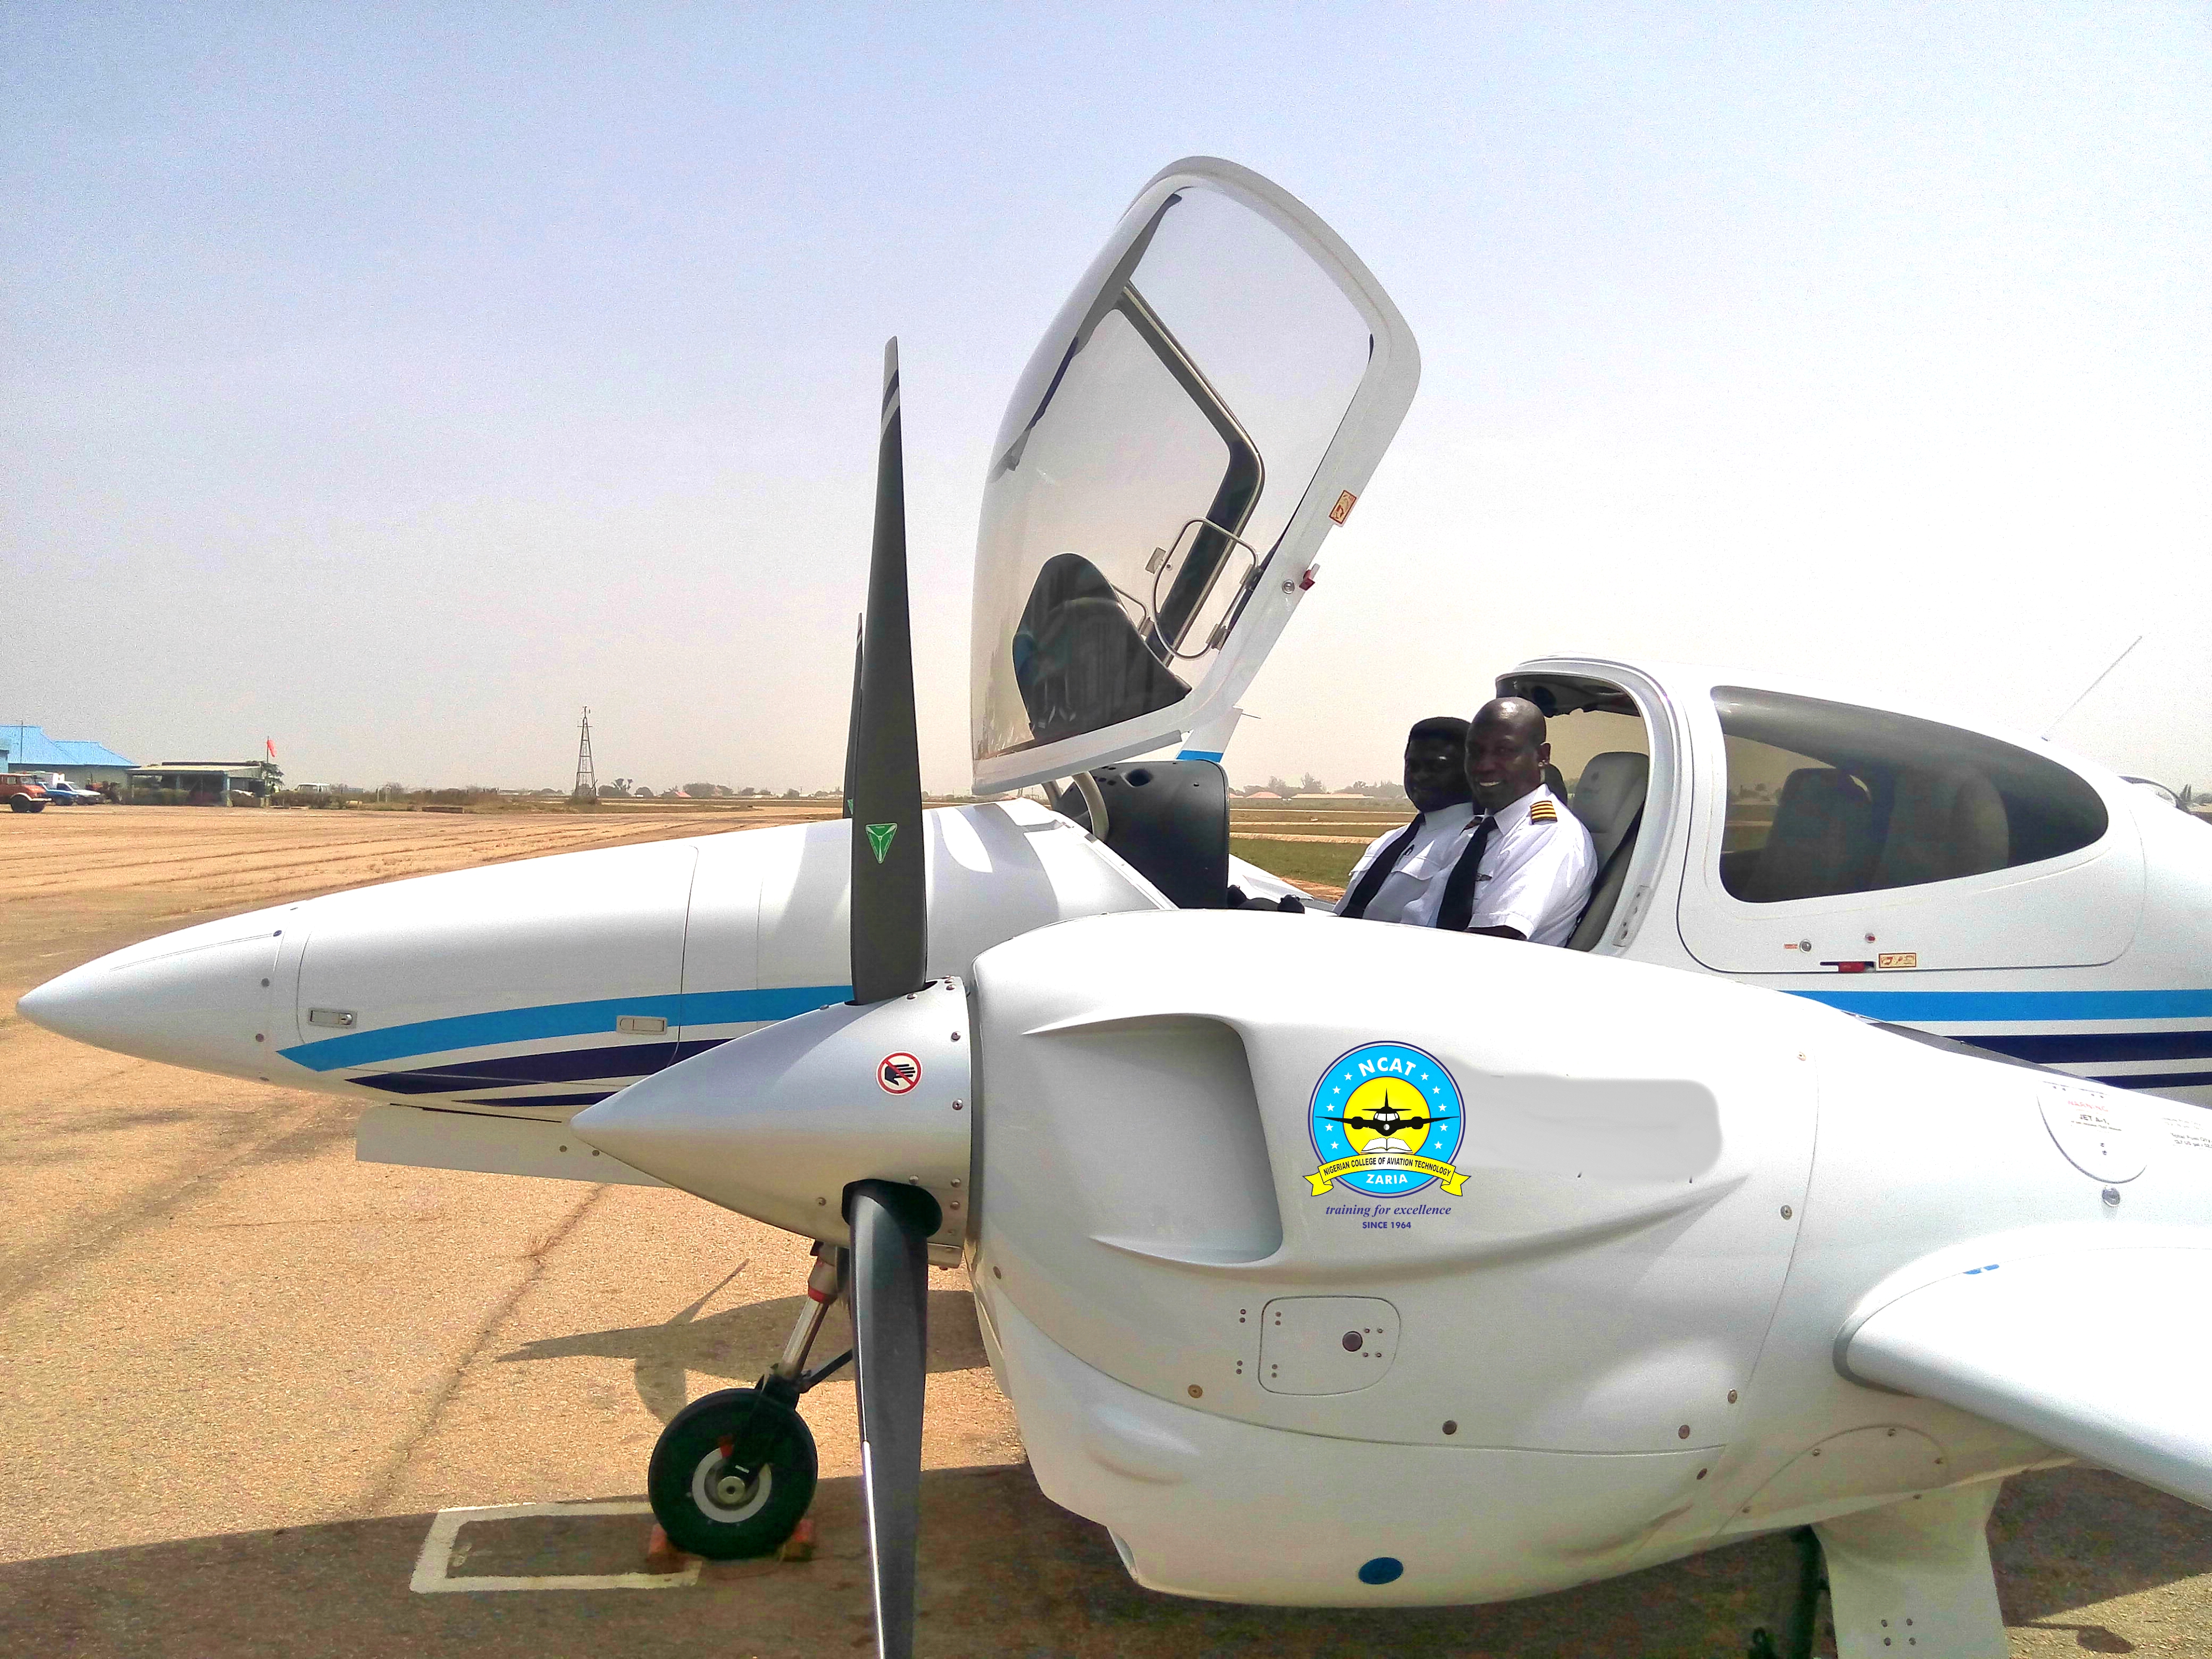 Press Release: TB-9 Aircraft Pilot Executed a Successful Forced Landing